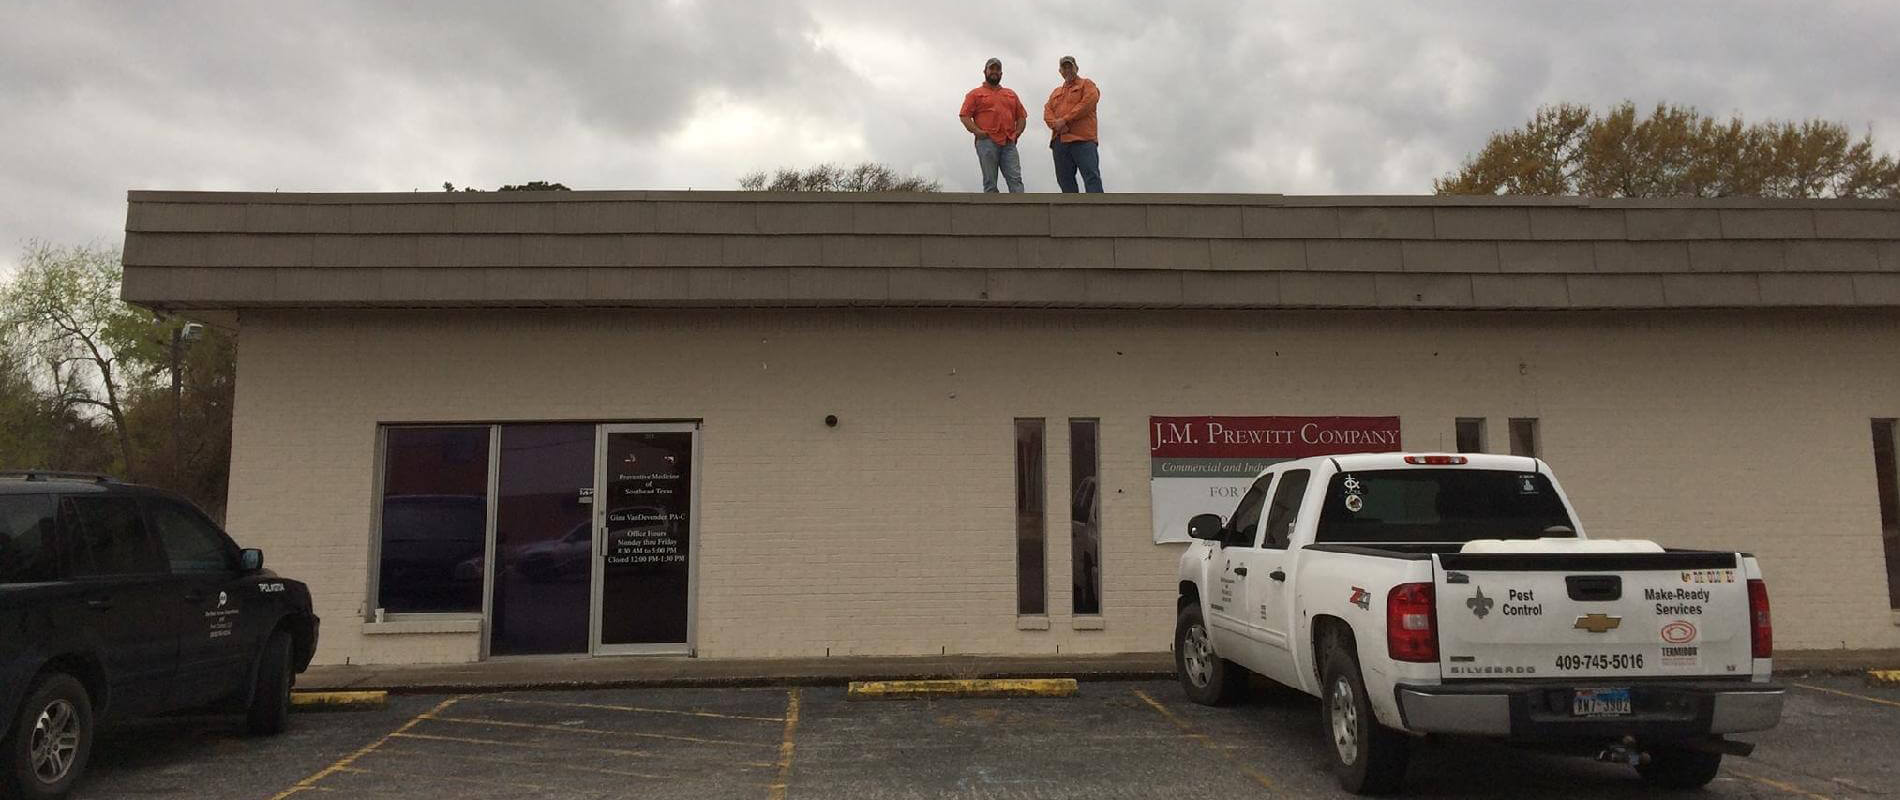 Two men standing on top of a building